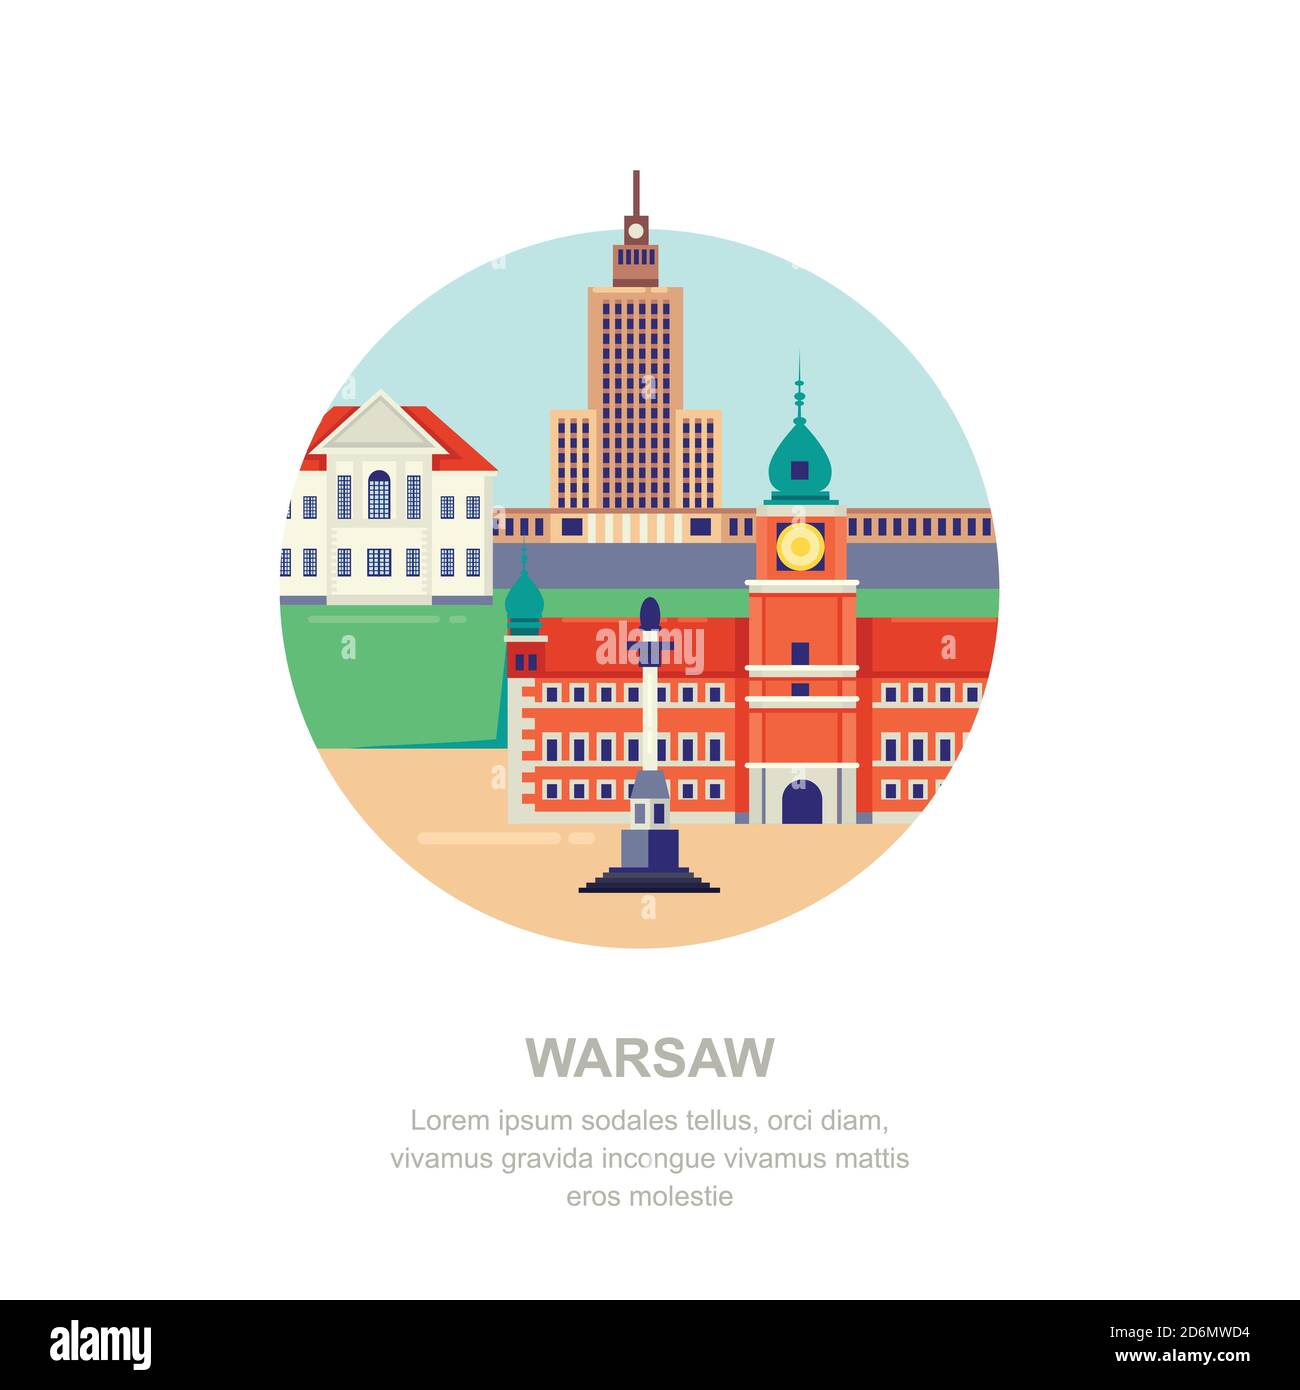 Travel to Poland vector flat illustration. Warsaw city symbols and touristic landmarks. City building icons and design elements. Stock Vector